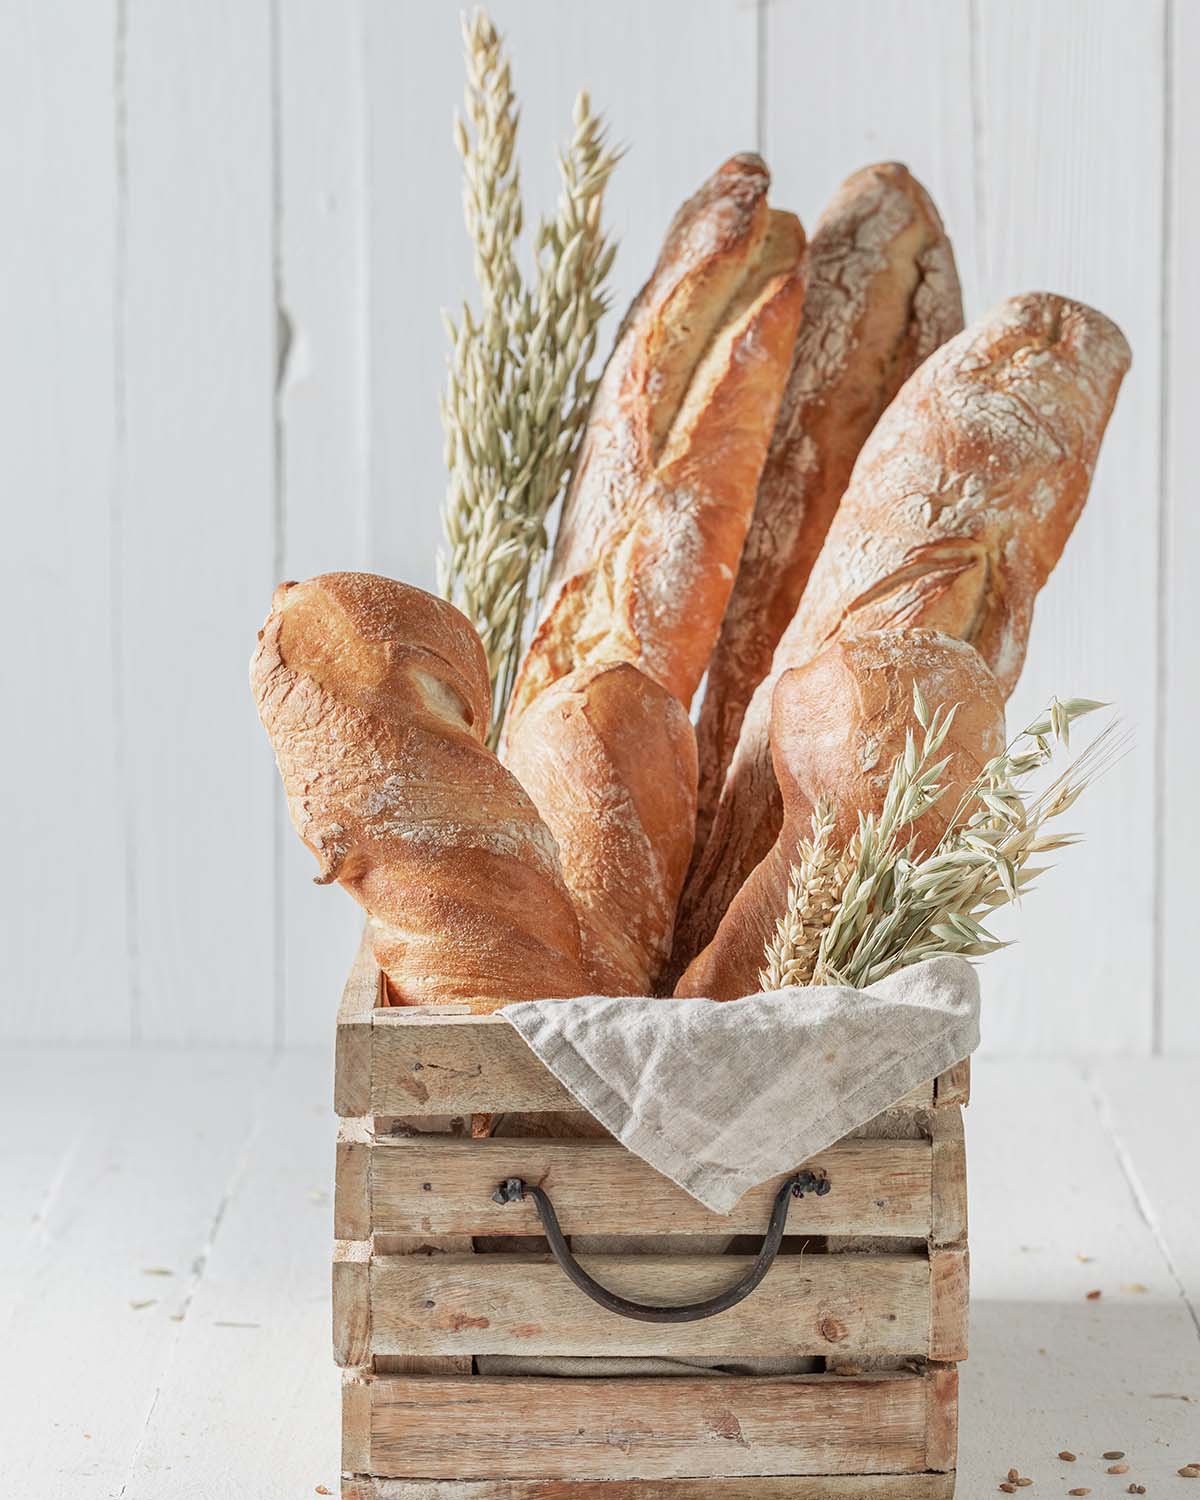 Rustic baguettes baked in bakery. Baguettes from the bakery. Pieces of baguette.